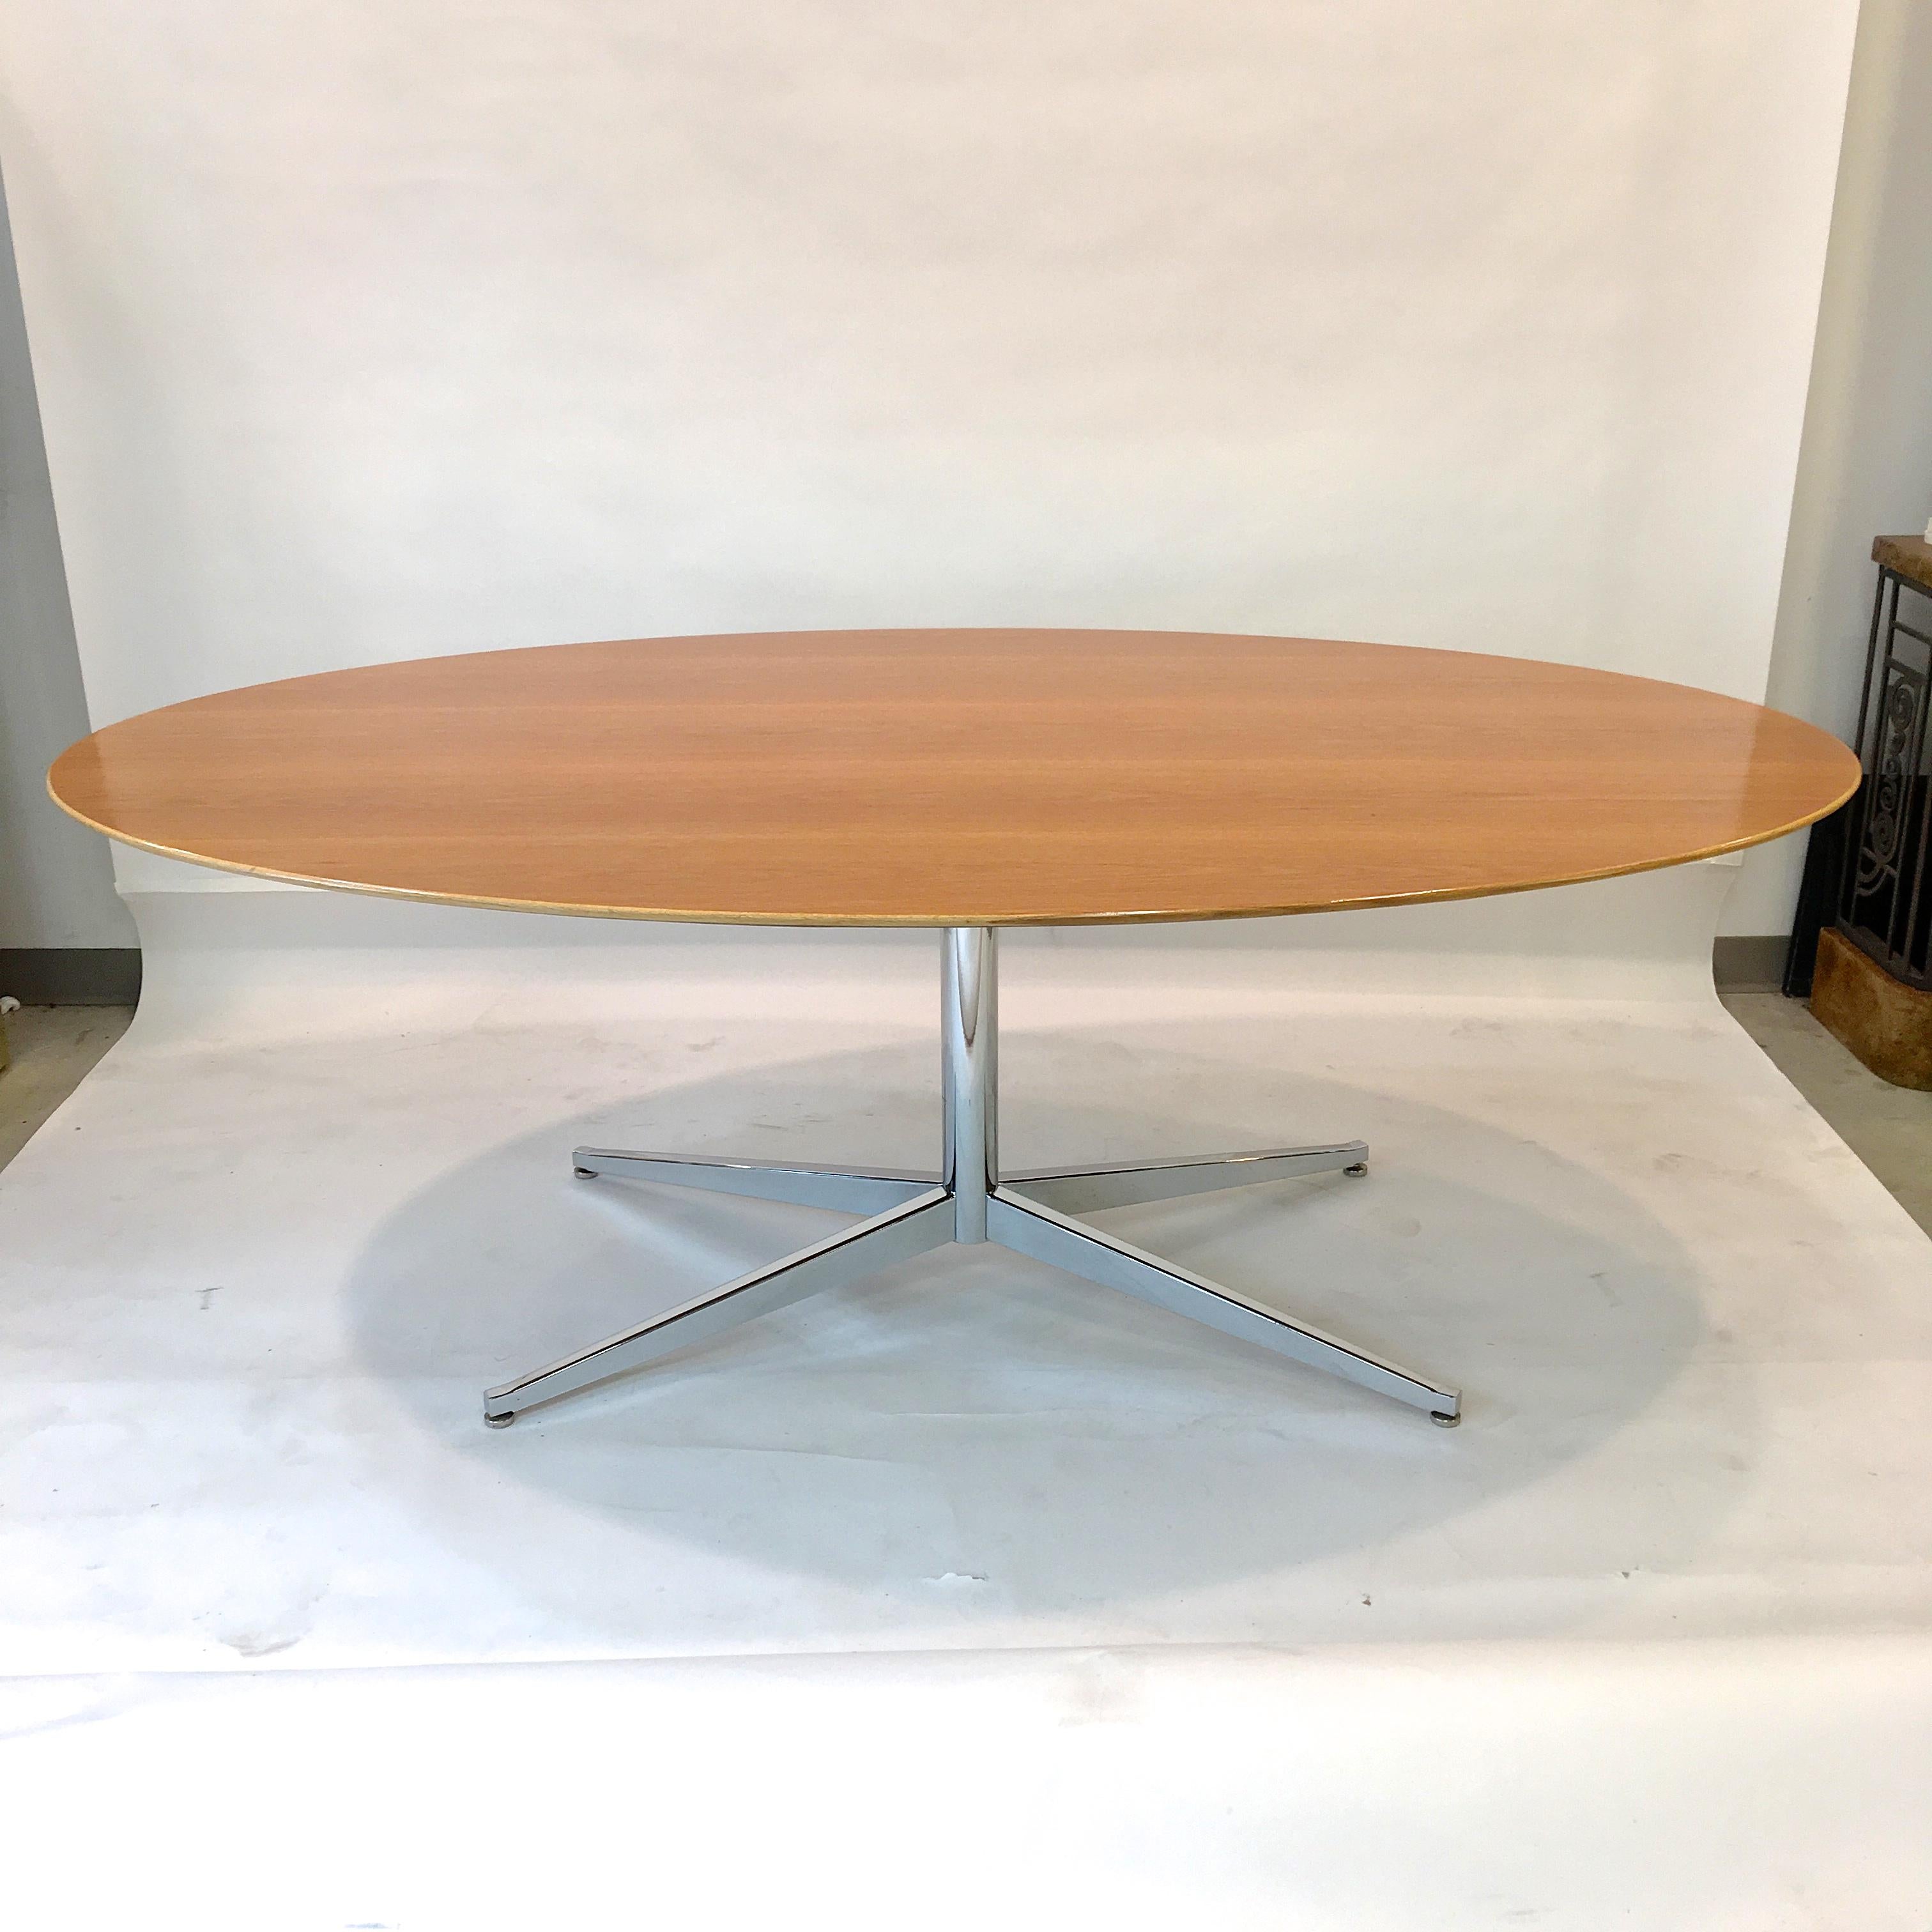 Original vintage Florence Knoll elliptical oval dining table or desk in oakwood with beveled edge on polished chromed steel pedestal and four star X base.

Beautifully restored and ready to use.

Florence Knoll designed this iconic desk in 1961